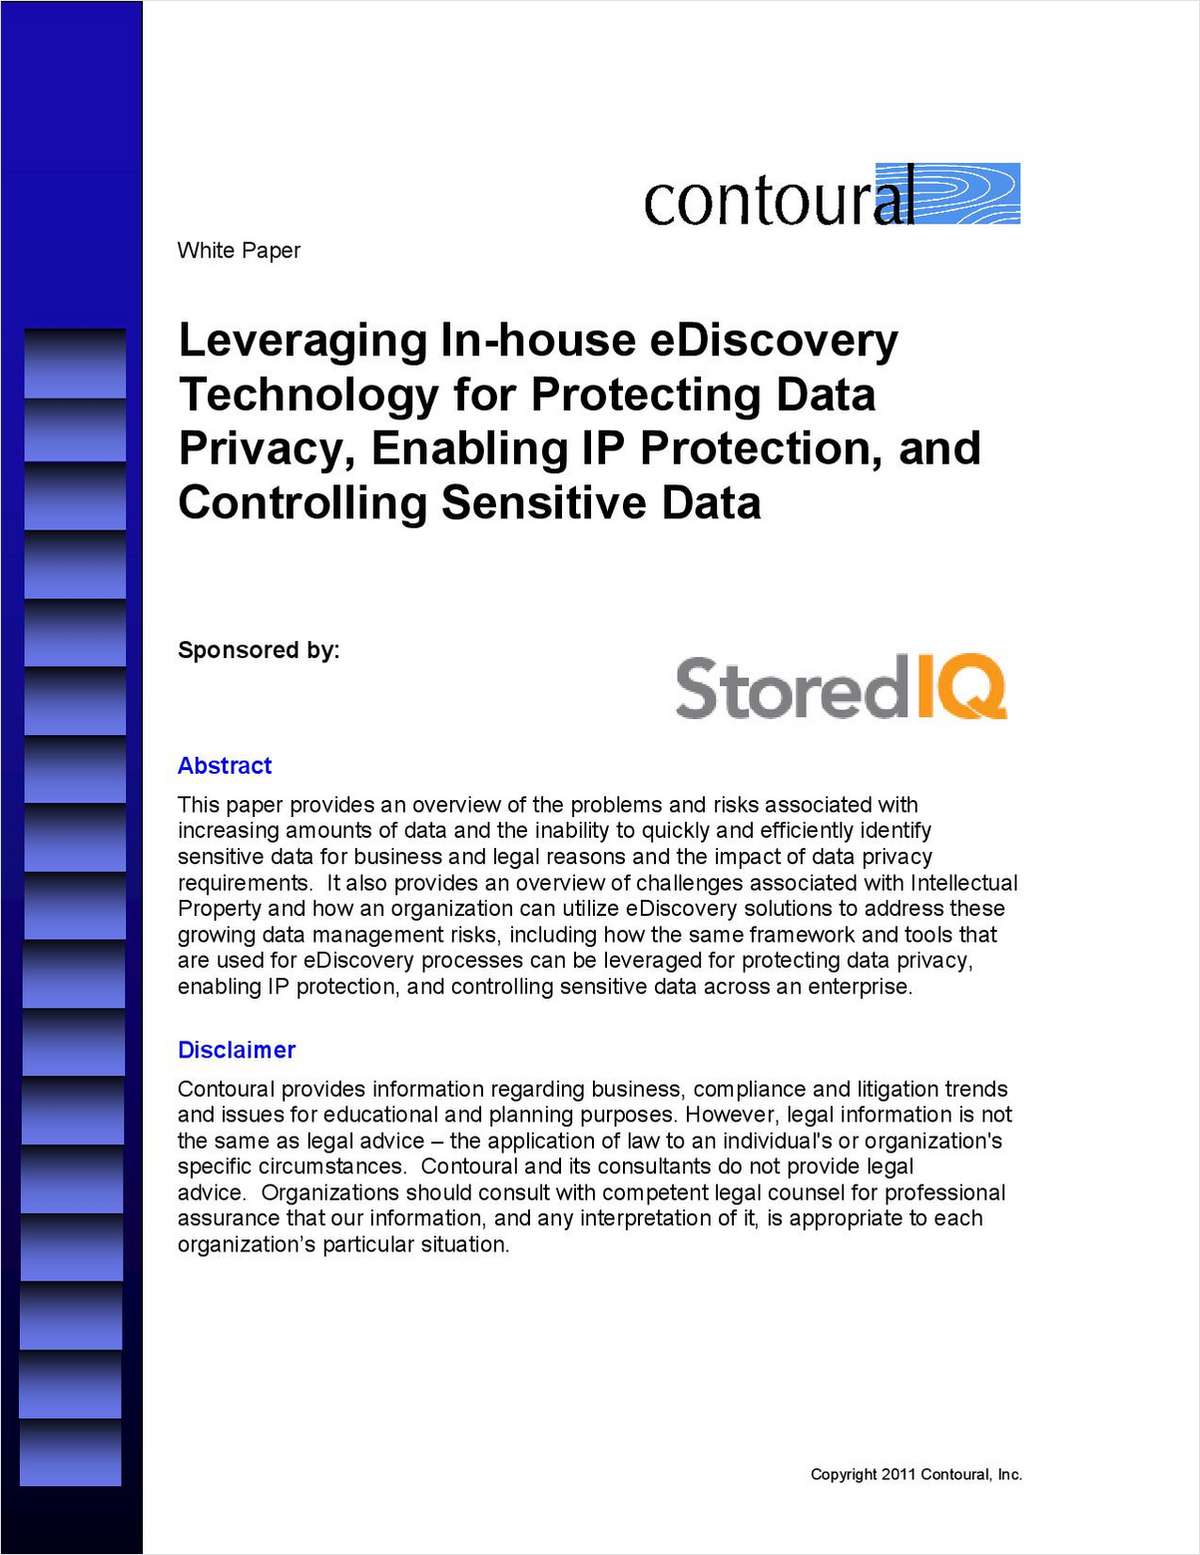 Leveraging In-house eDiscovery Technology for Protecting Data Privacy, Enabling IP Protection, and Controlling Sensitive Data